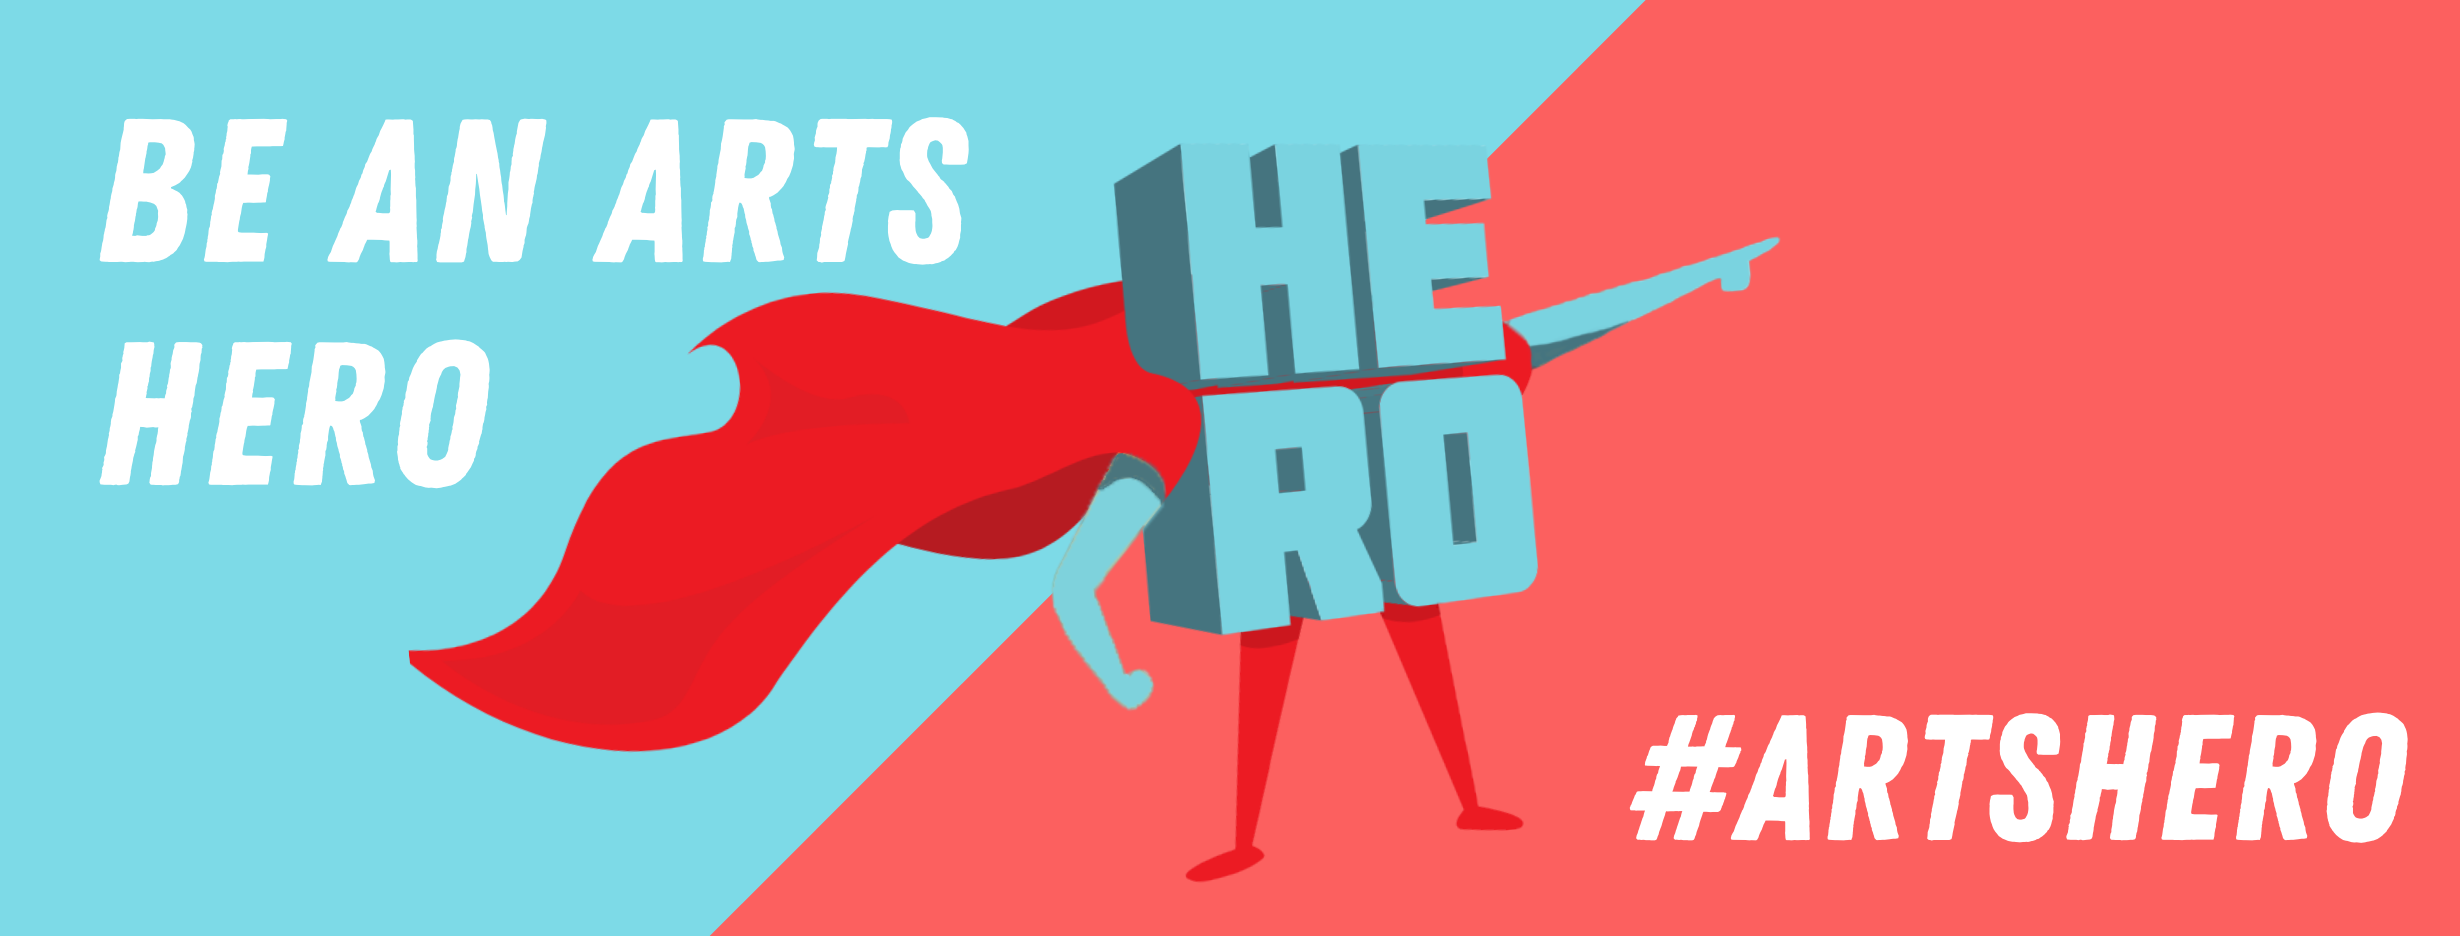 Arts advocacy starts with you! Be an #ArtsHero and write to your Senators this week.